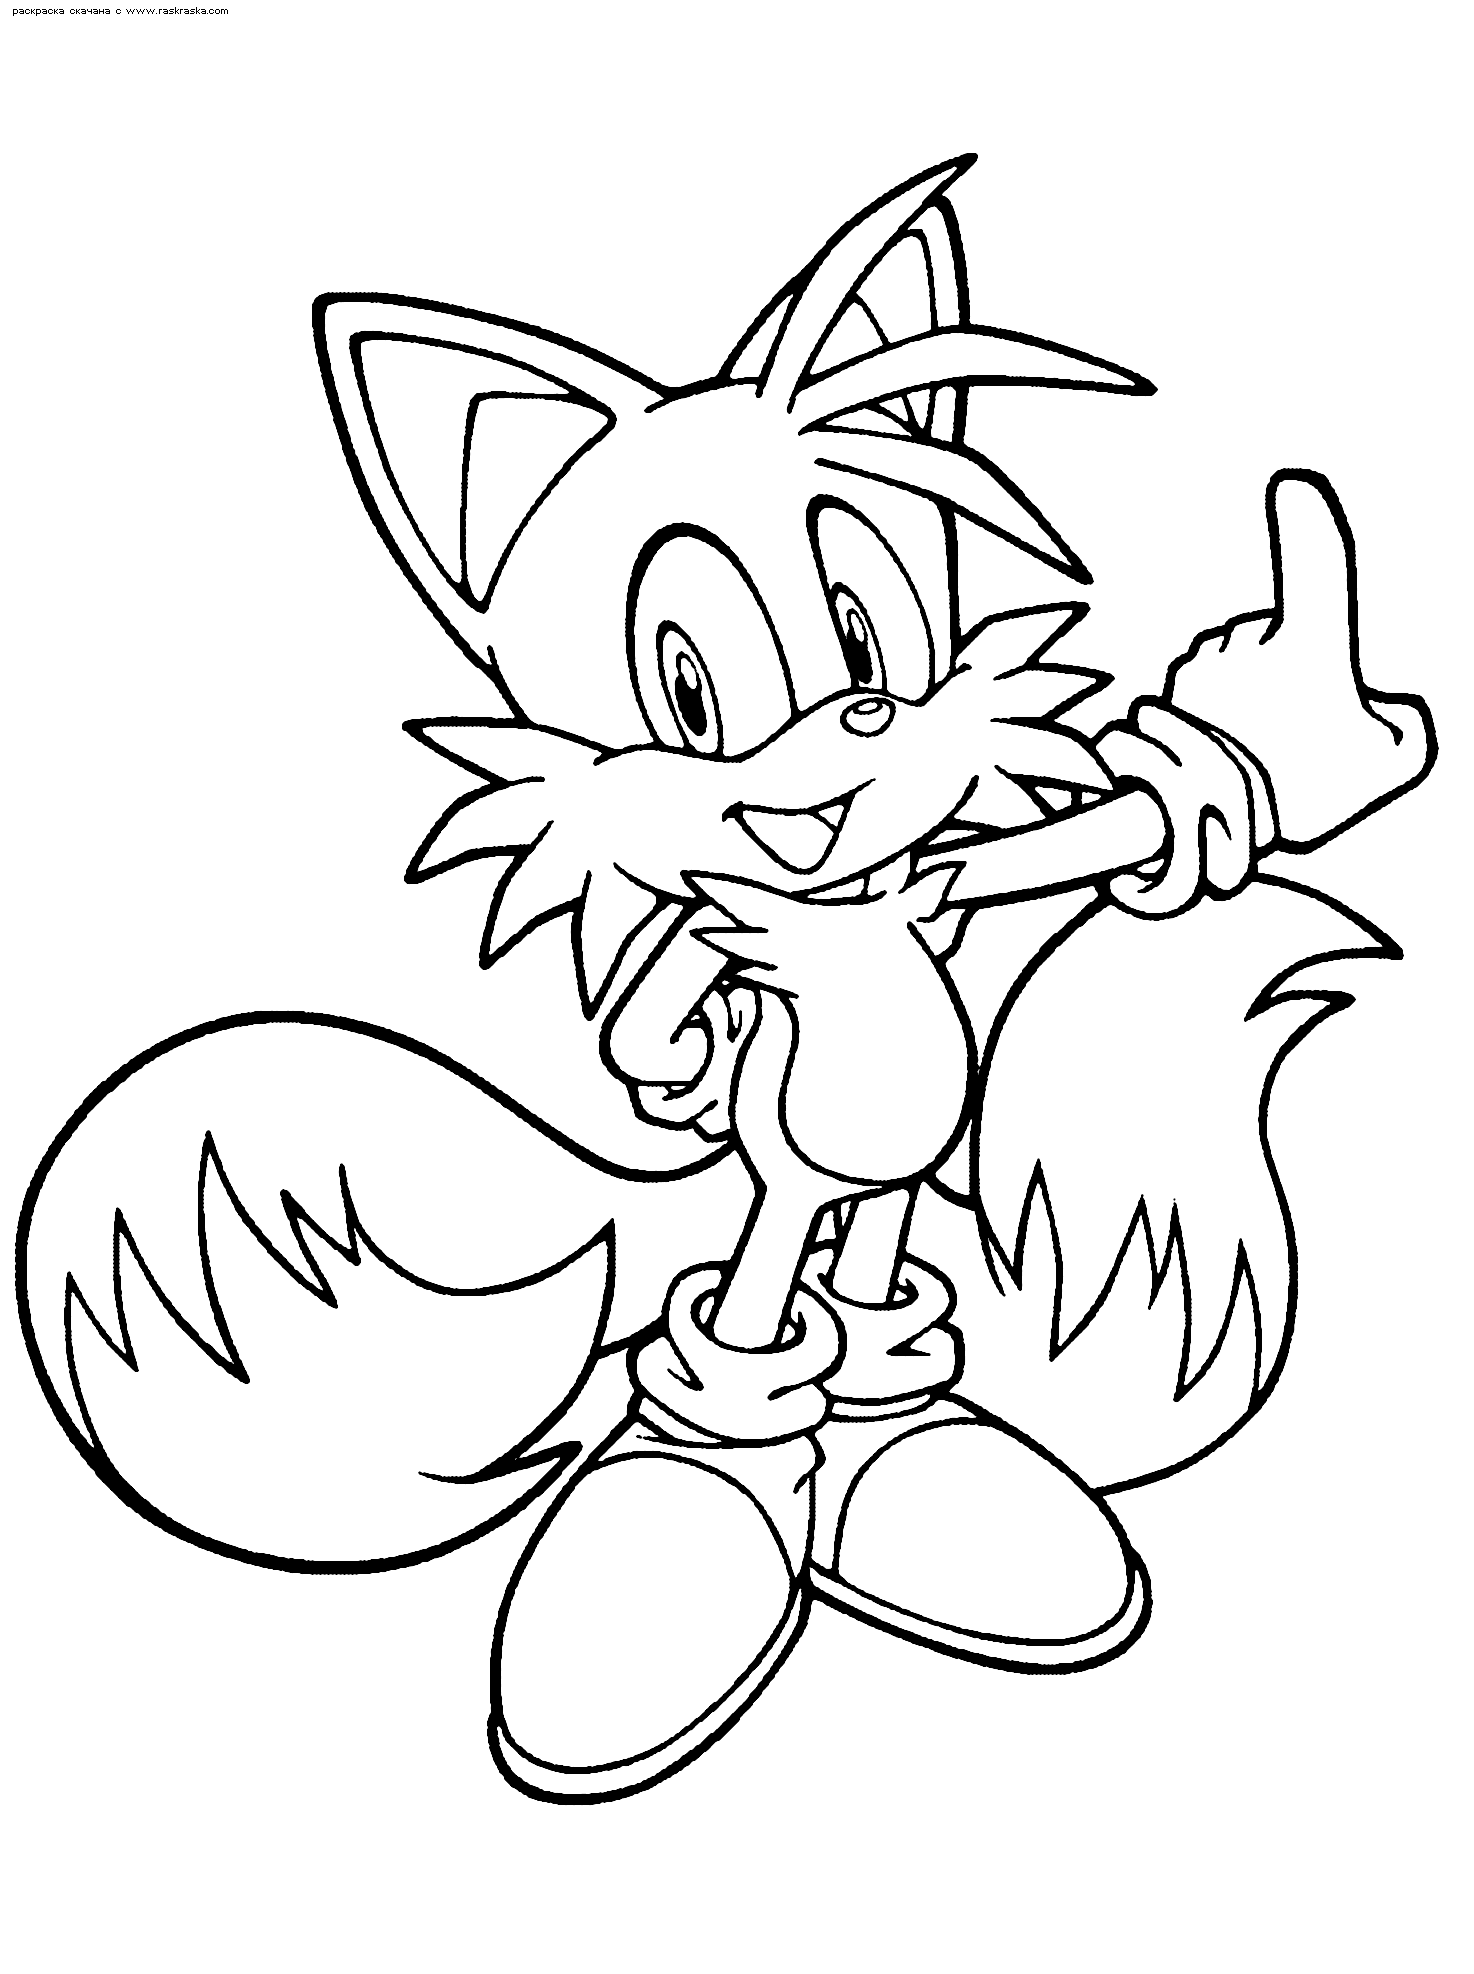 236 Cartoon Sonic Tails Coloring Pages for Kids